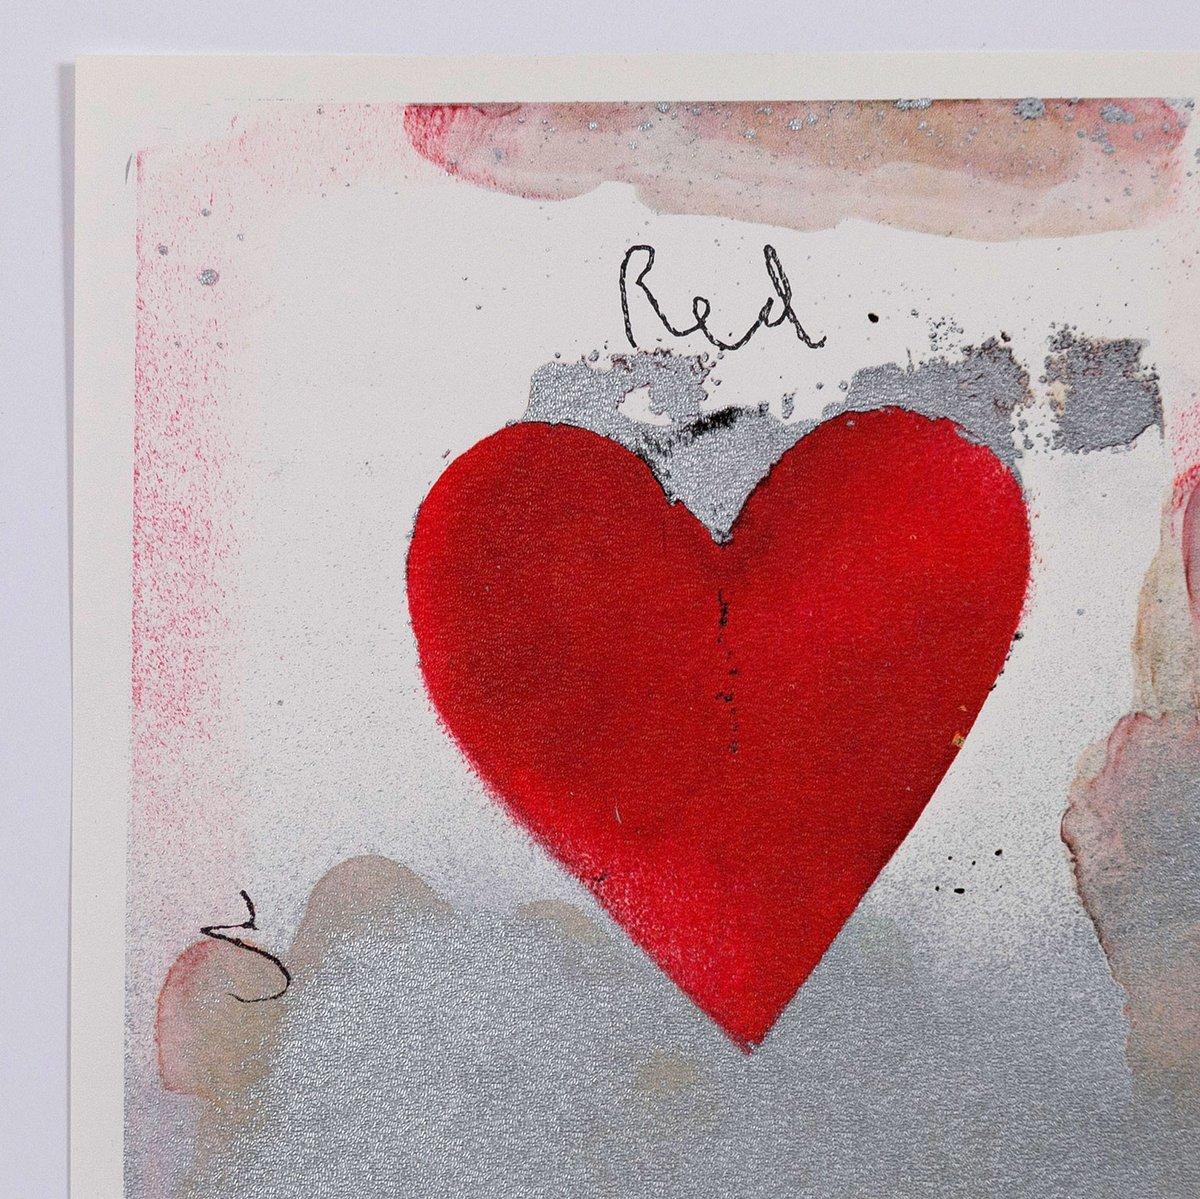 8 Hearts / Look, Off-set Lithograph with metallic paper collage overlay, 1970 1